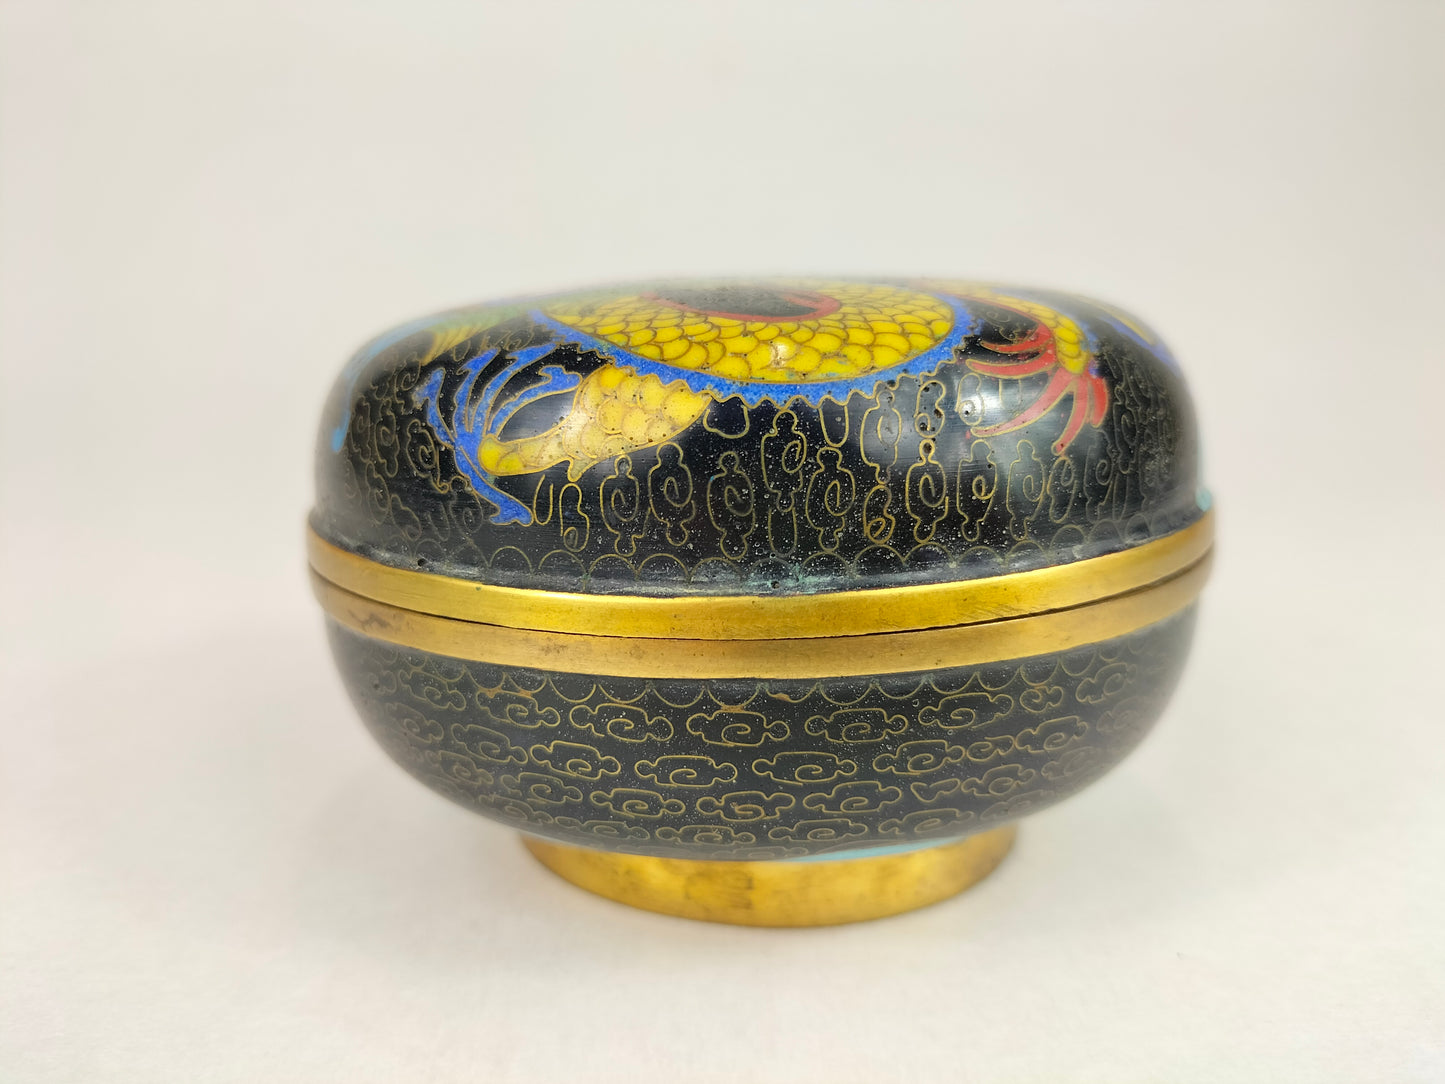 Chinese cloisonne lidded box decorated with an Imperial dragon // Republic Period (1912-1949)